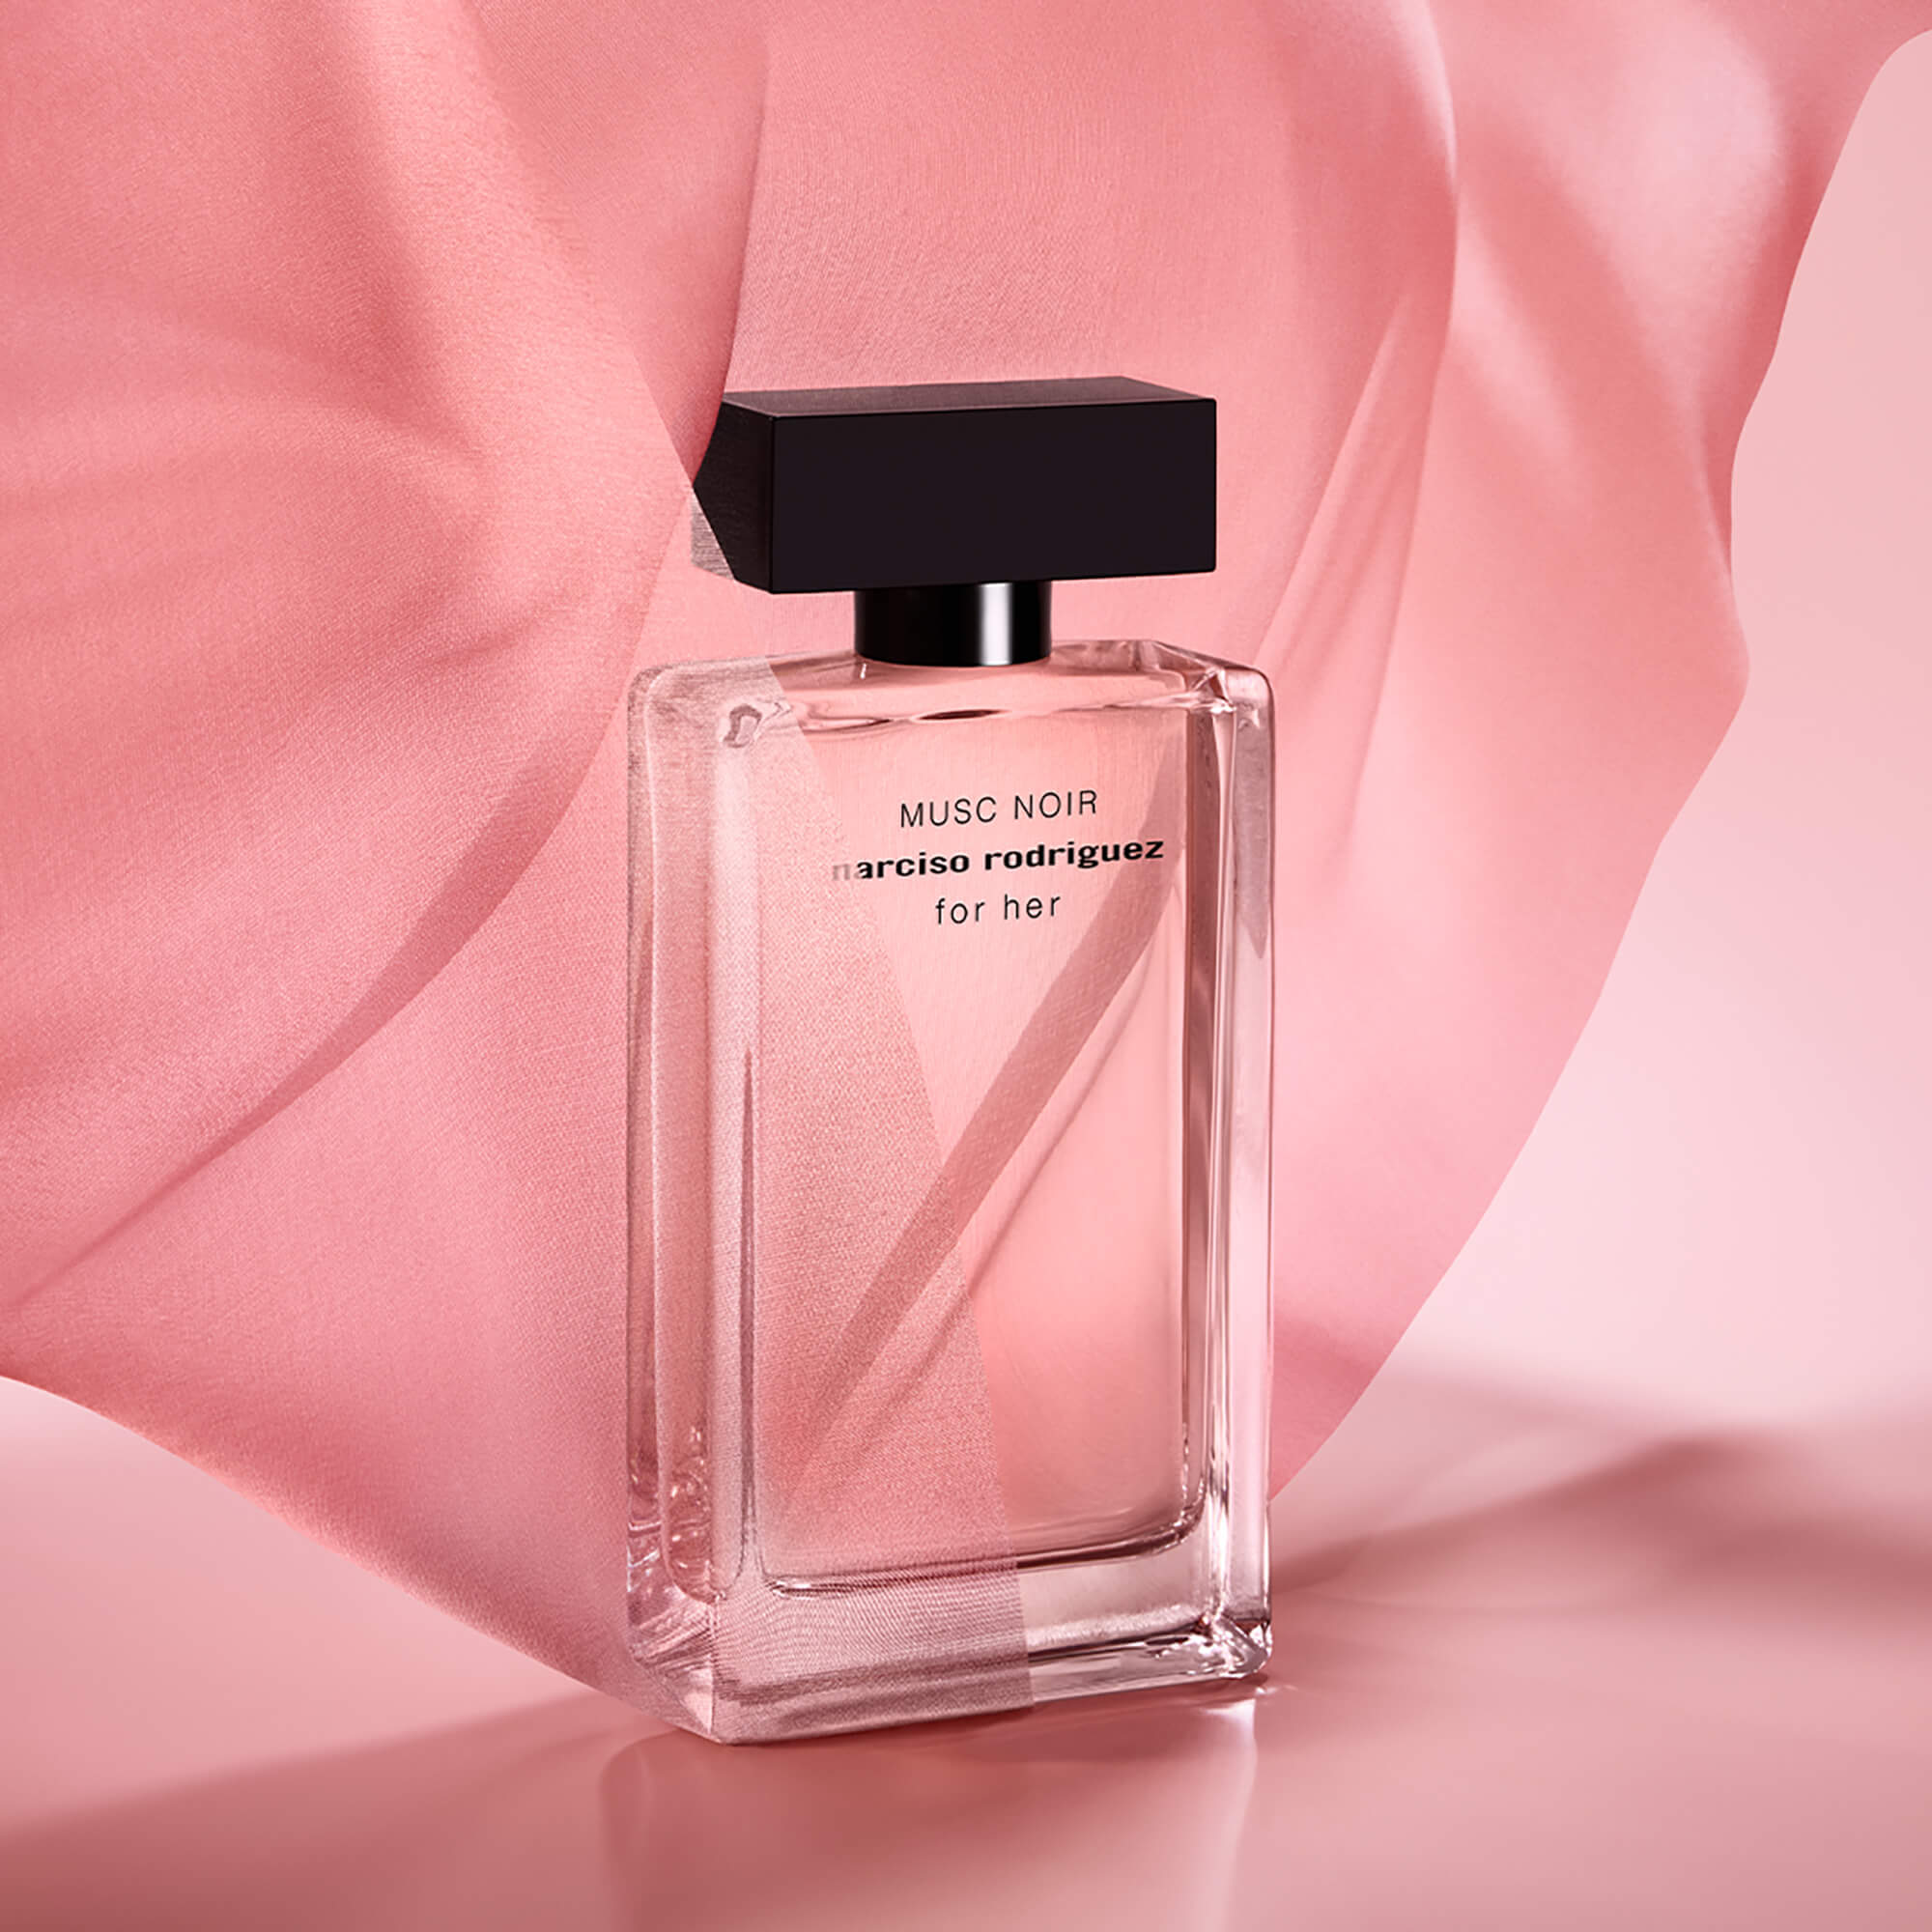 Narciso rodriguez musc noir rose. Narciso Rodriguez Musc Noir. Narciso Rodriguez Noir for her. Narciso Rodriguez for her Musk Noir Rose.